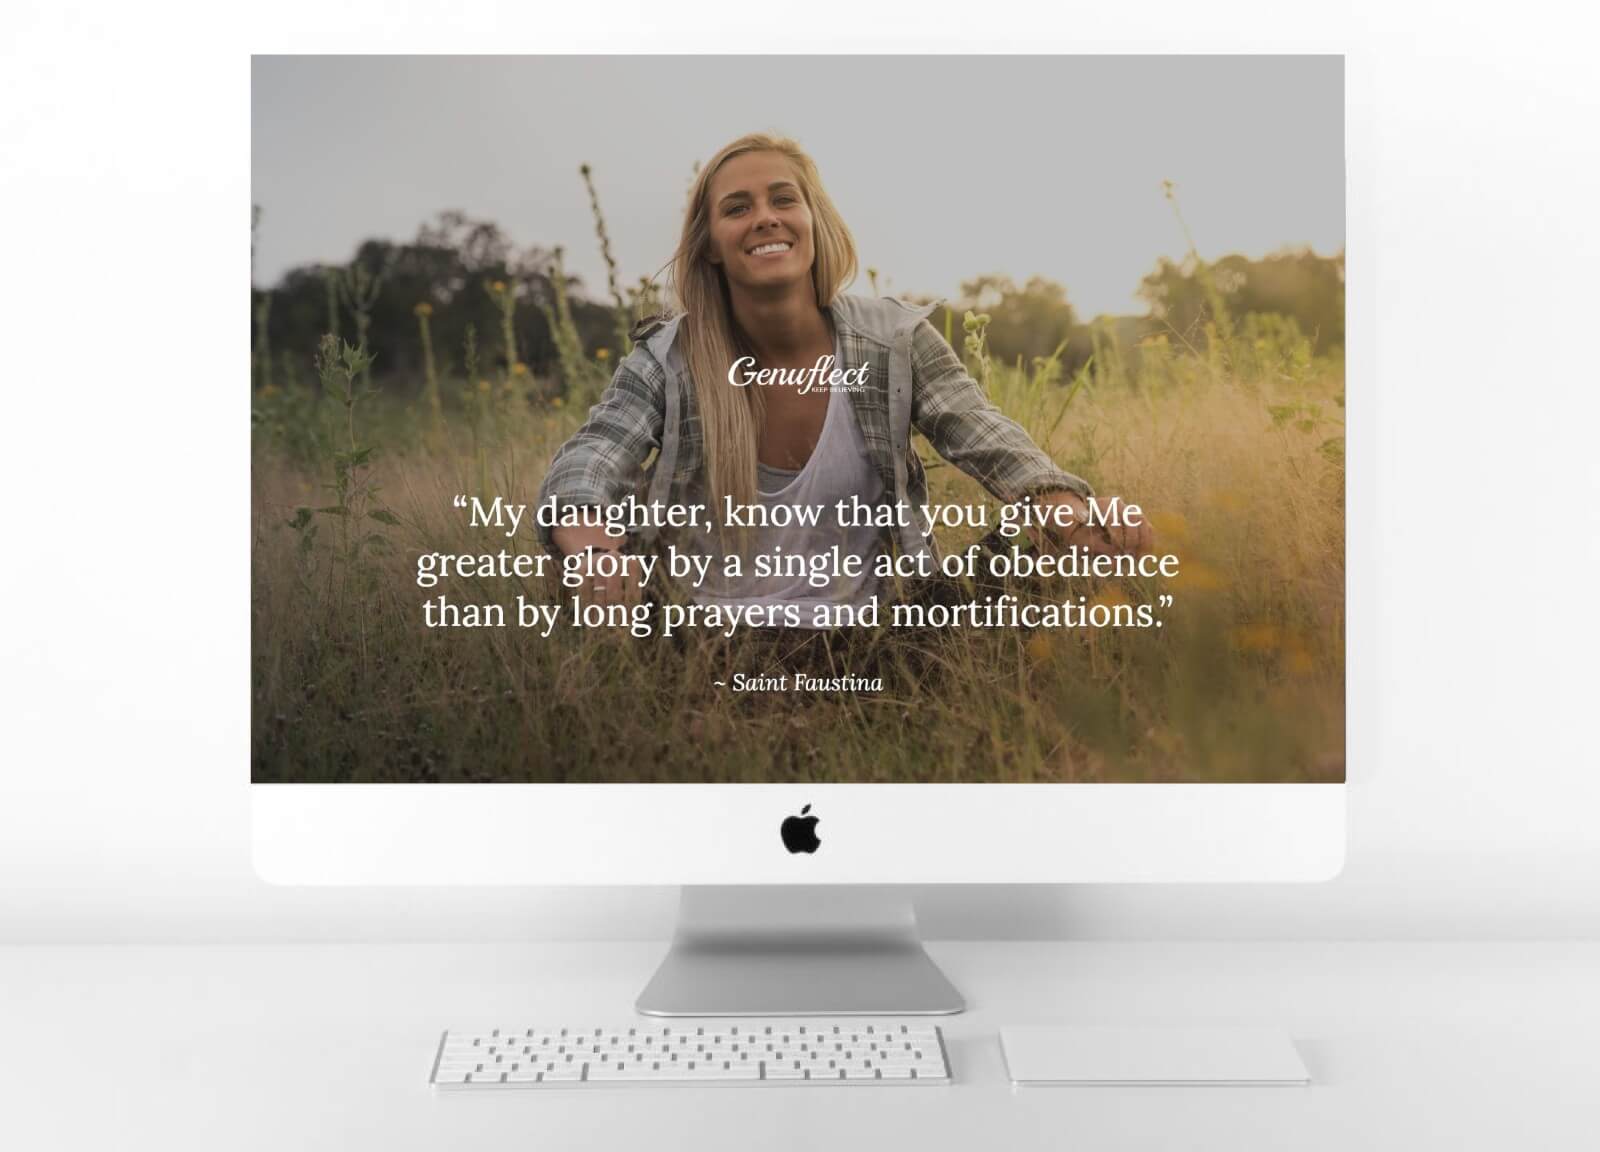 Genuflect computer background image of a Smiling woman sitting crosslegged outside in a field with the sun shining